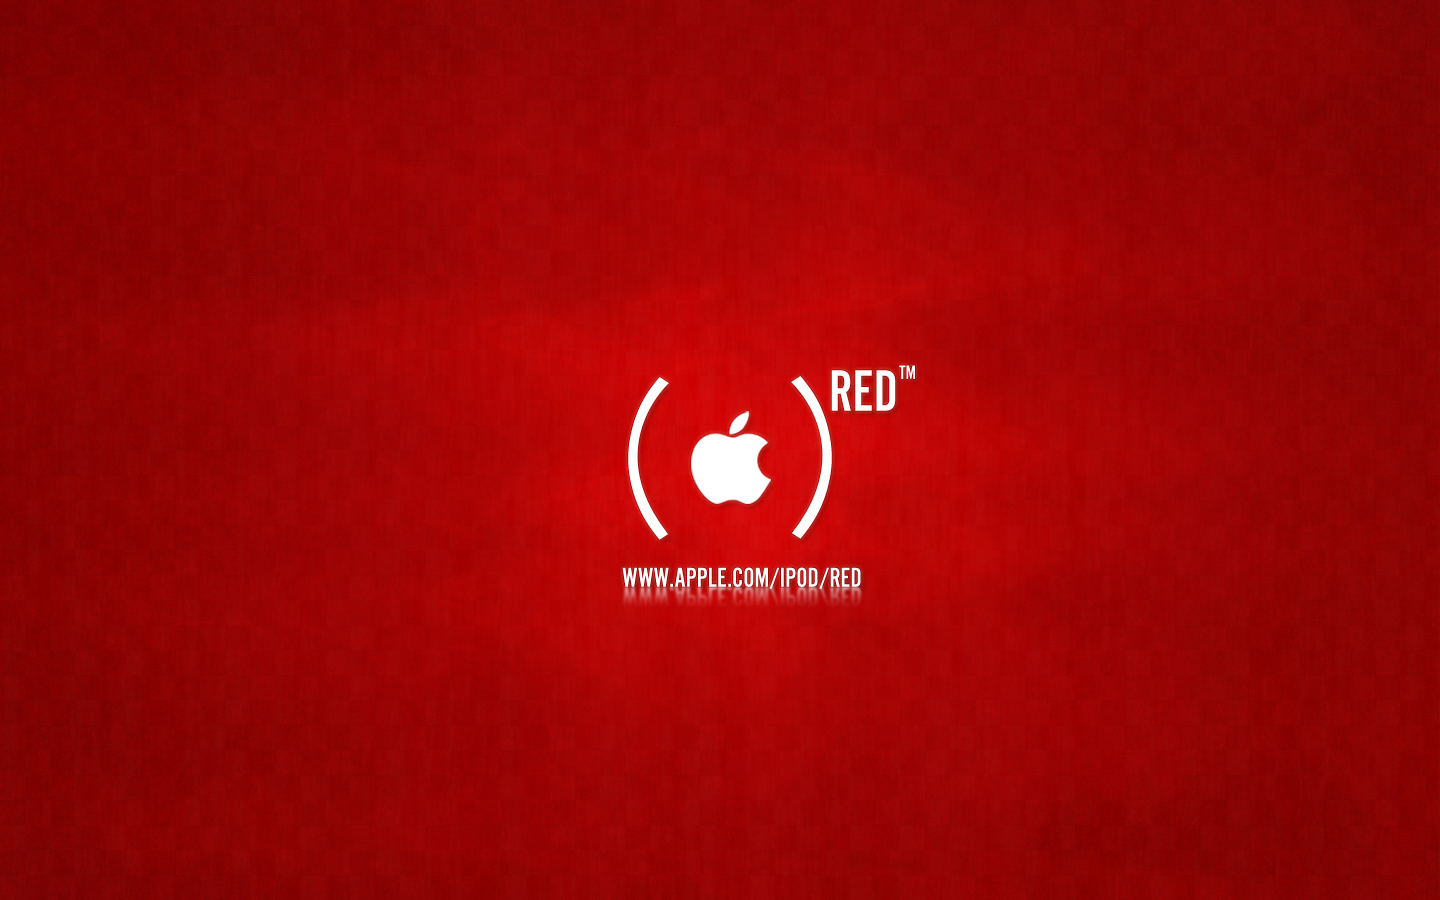 [Imagen: Apple_Product_Red_by_keepitreal23.jpg]